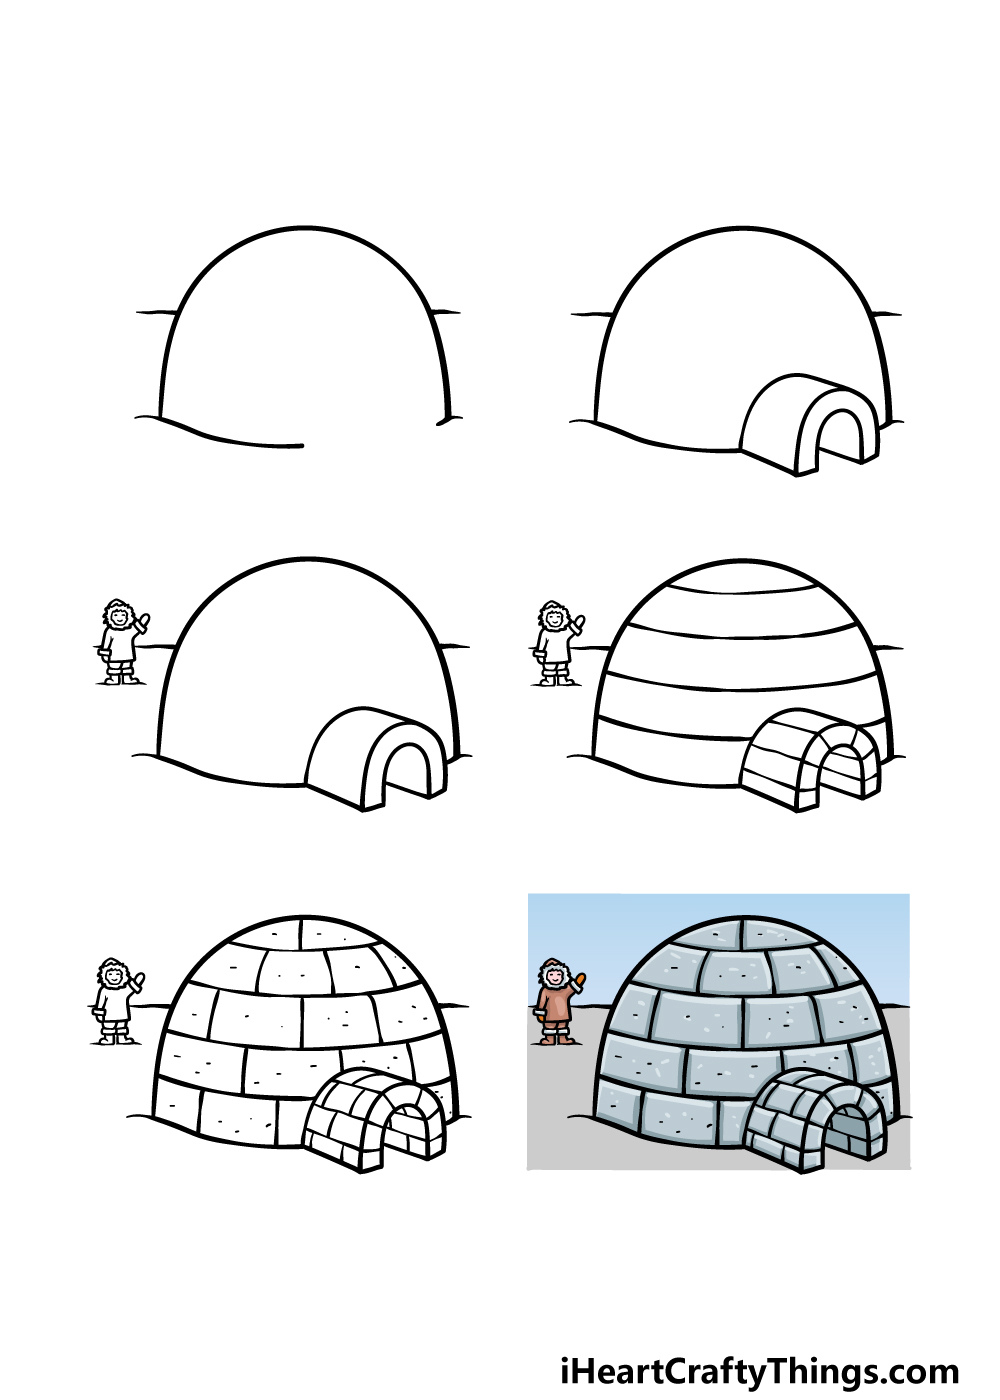 how to draw an Igloo in 6 steps